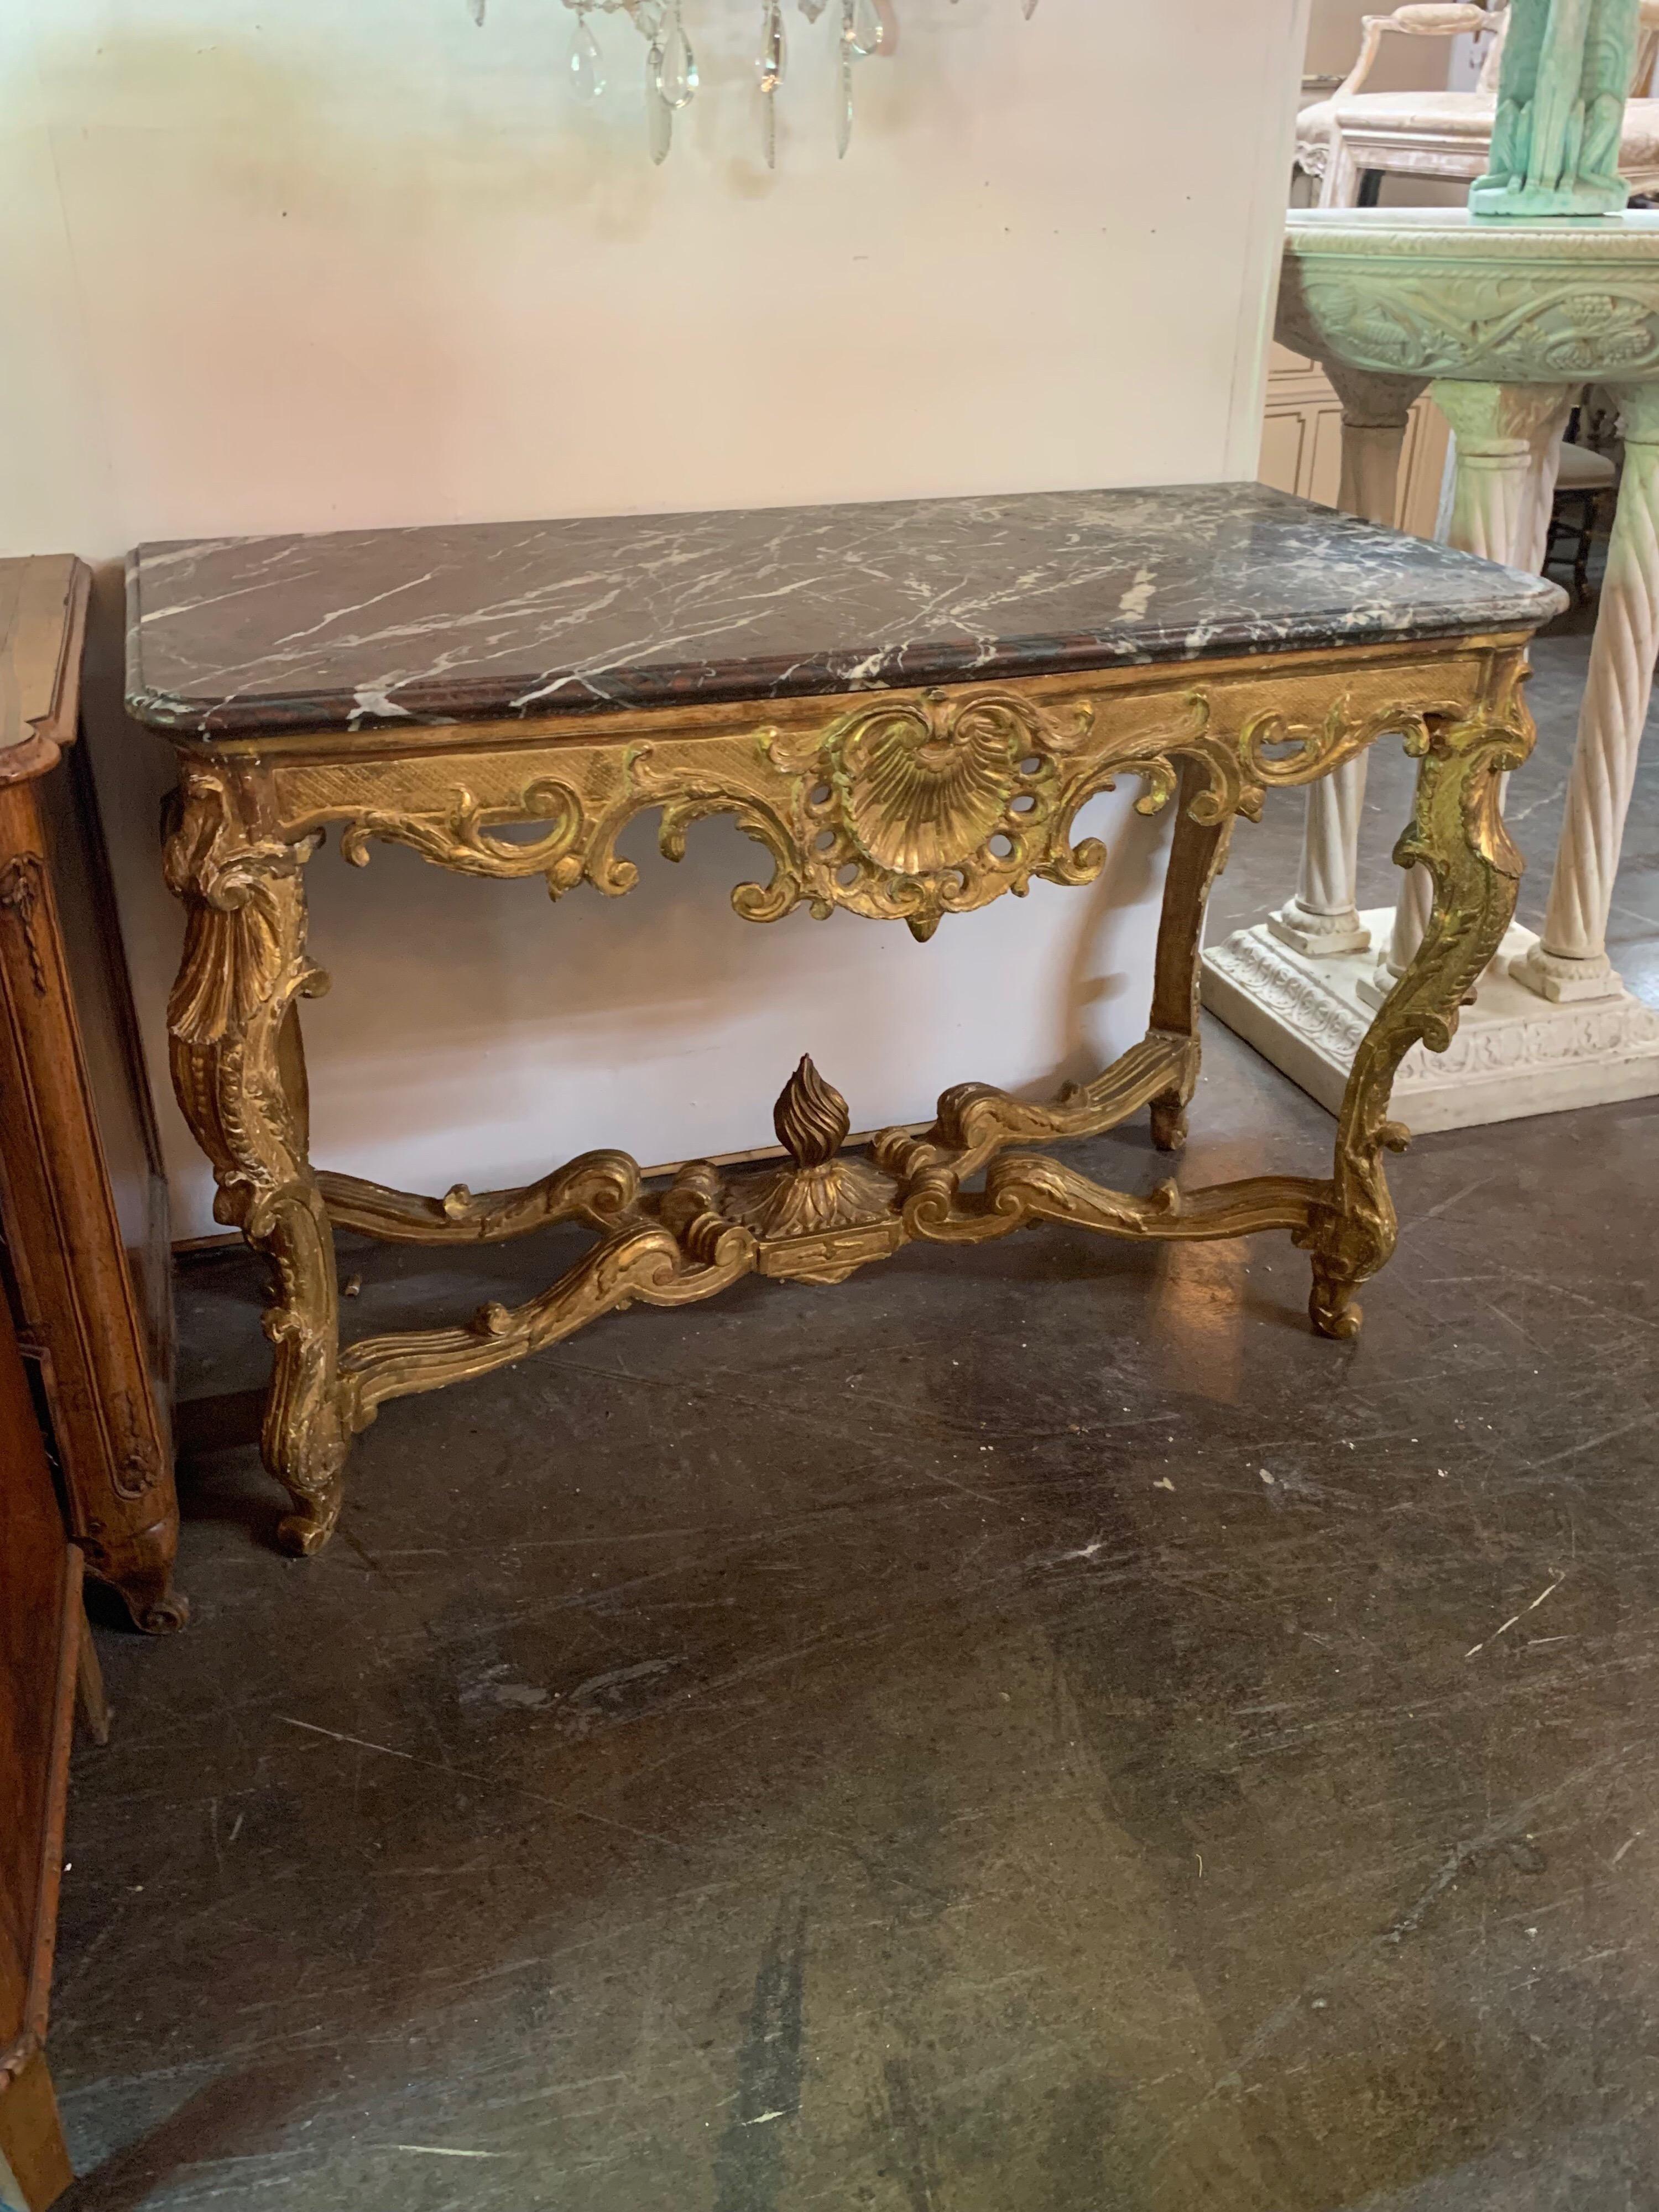 Period French Regence carved and giltwood console with original rouge and grey marble top. Very fine carving and gilt on this piece. Stunning,
circa 1720.

  